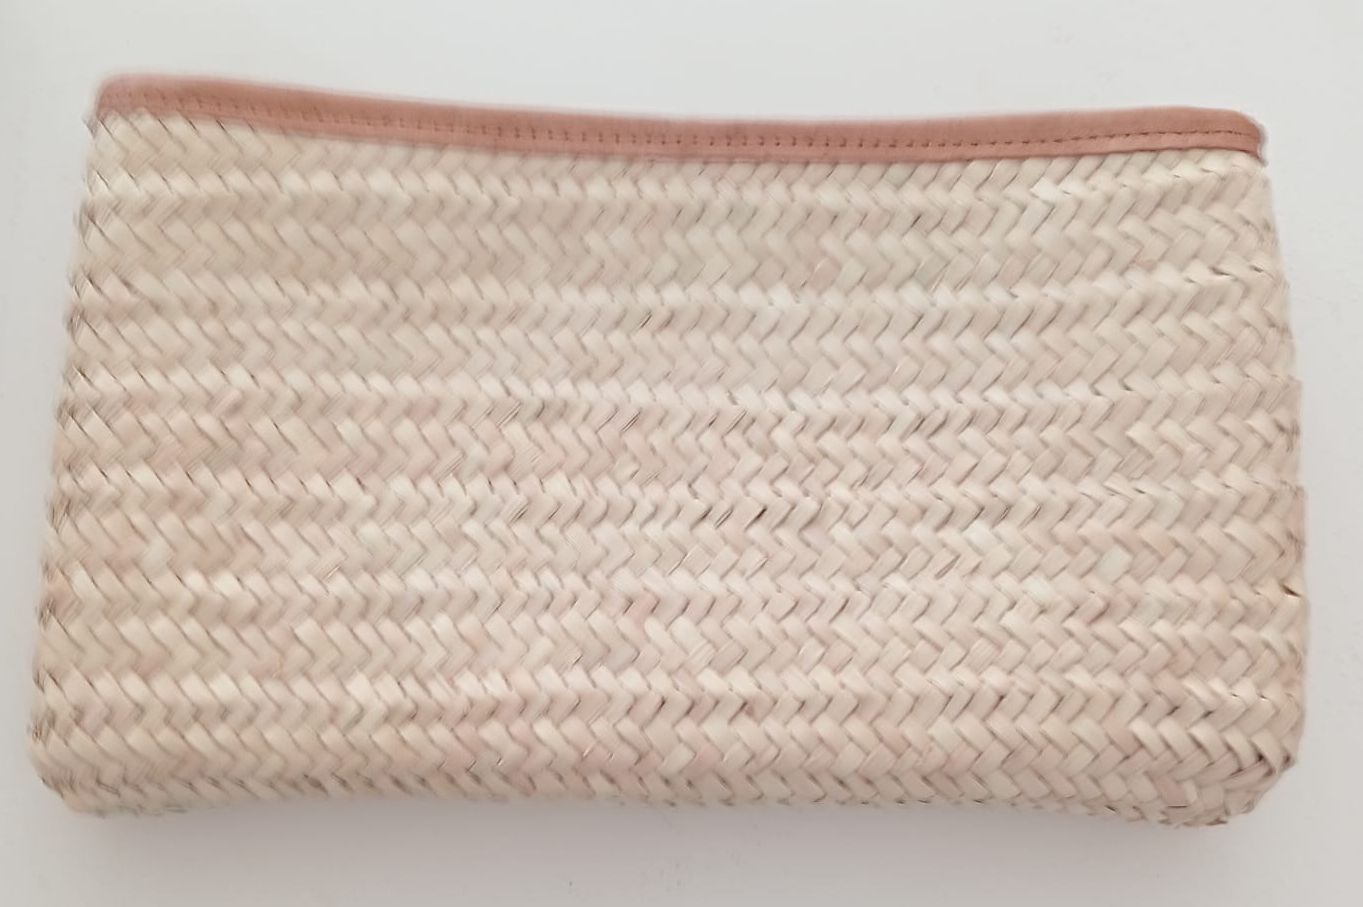 Rectangular clutch hand made and woven in palm leaves with wool embroidery, La Vie Est Belle motif